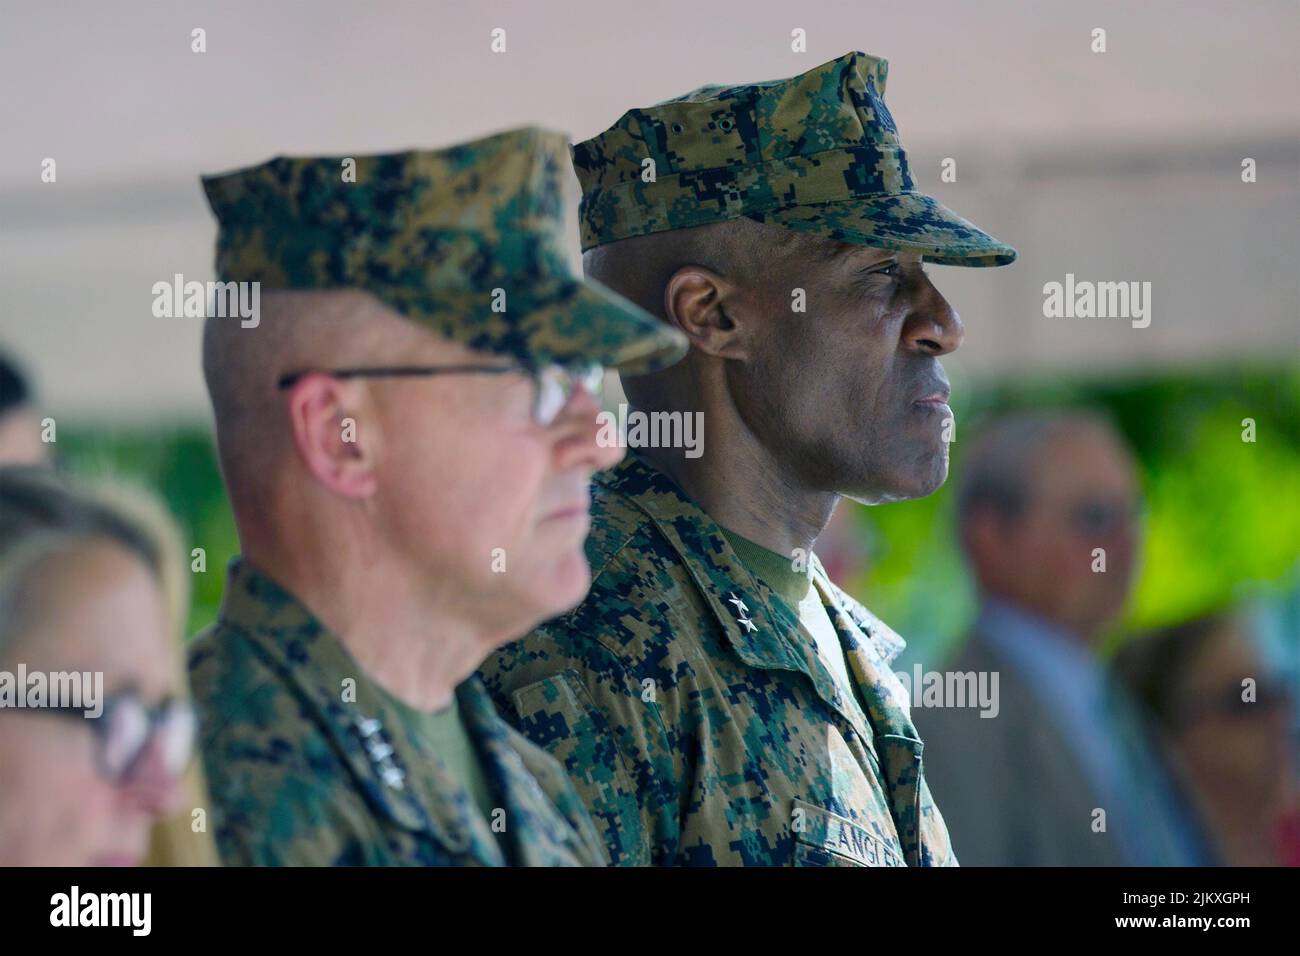 U.S. Marine Corps Maj. General Michael E. Langley, commanding officer of 2nd Marine Expeditionary Brigade, during the relinquishment of command ceremony, May 23, 2018, in Camp Lejeune, North Carolina. Langley will become the first Black four-star general in the Marines 246-year history, after the Senate confirmed his promotion August 3rd, 2022. Stock Photo